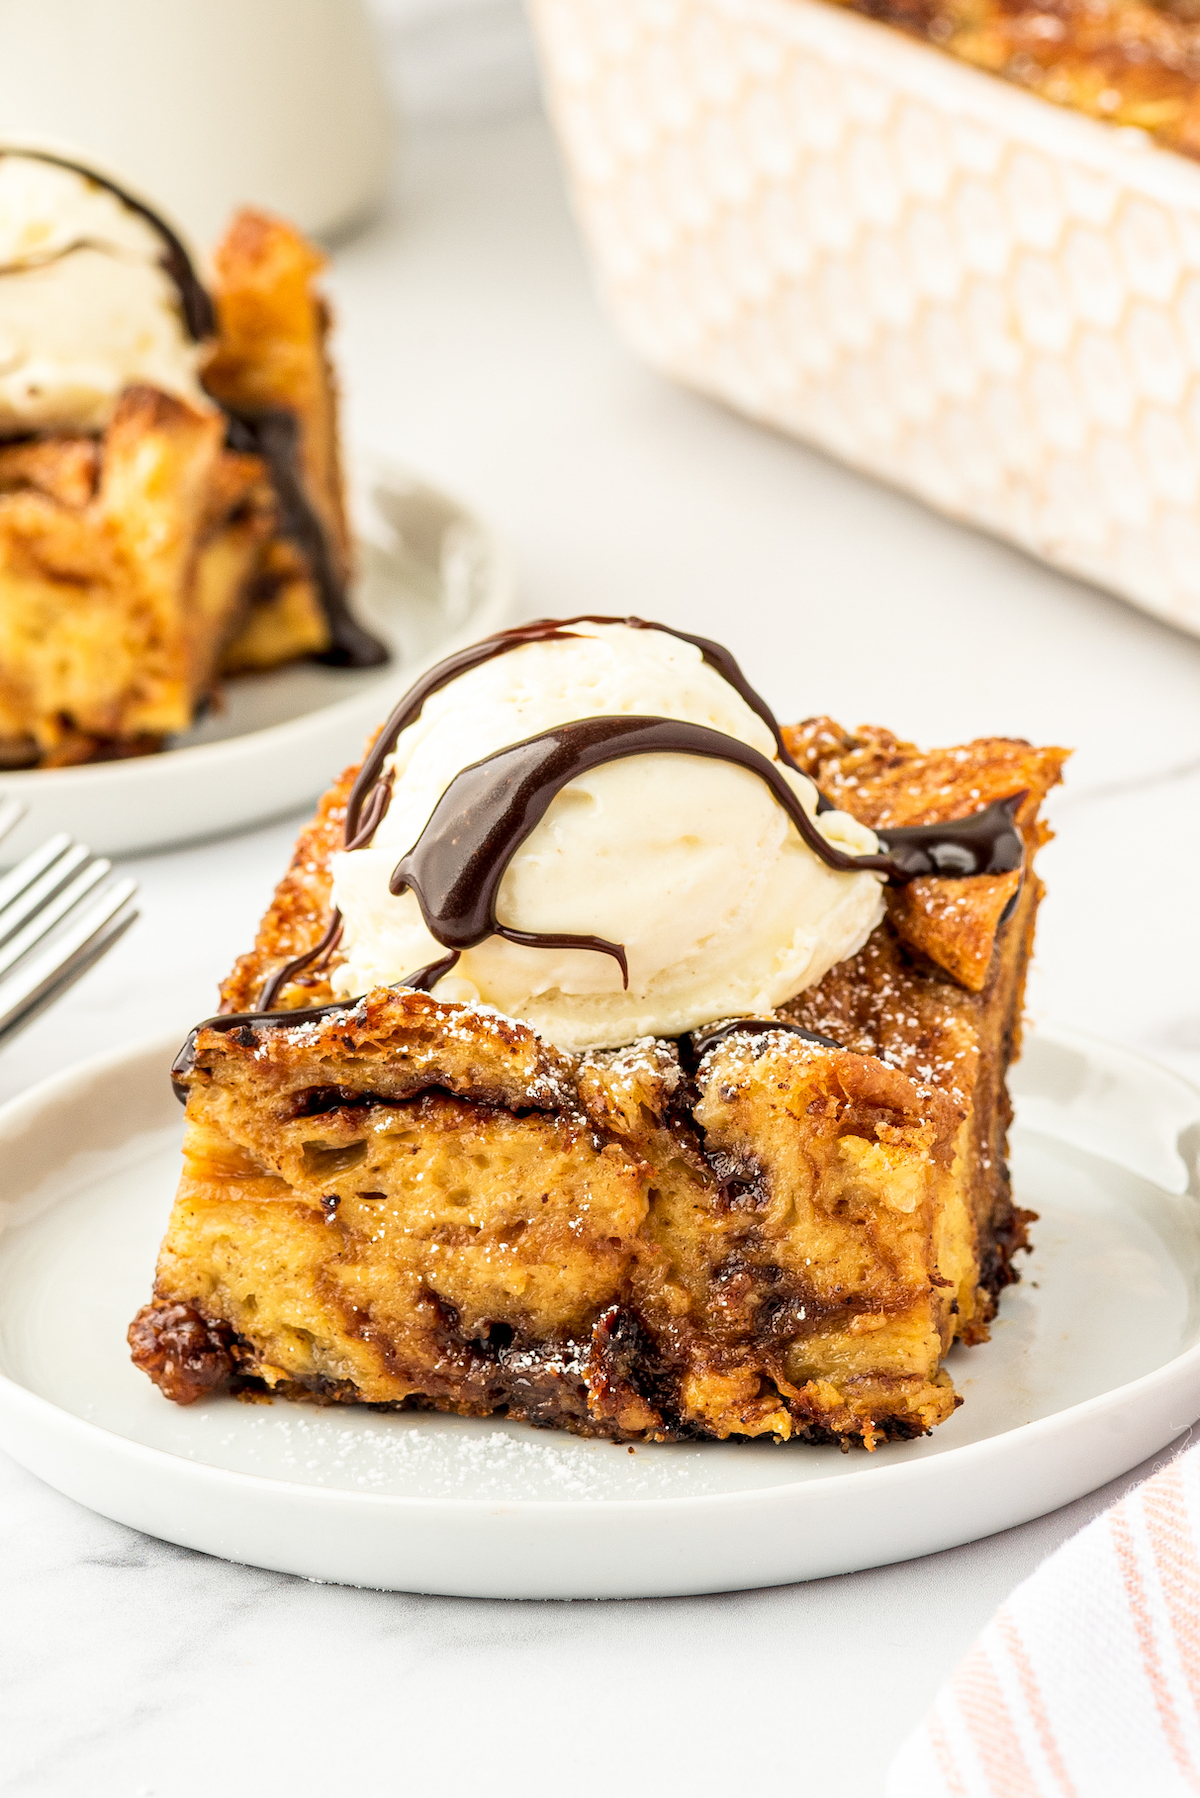 Bread pudding with Nutella streaked throughout, and an ice cream-Nutella topping.